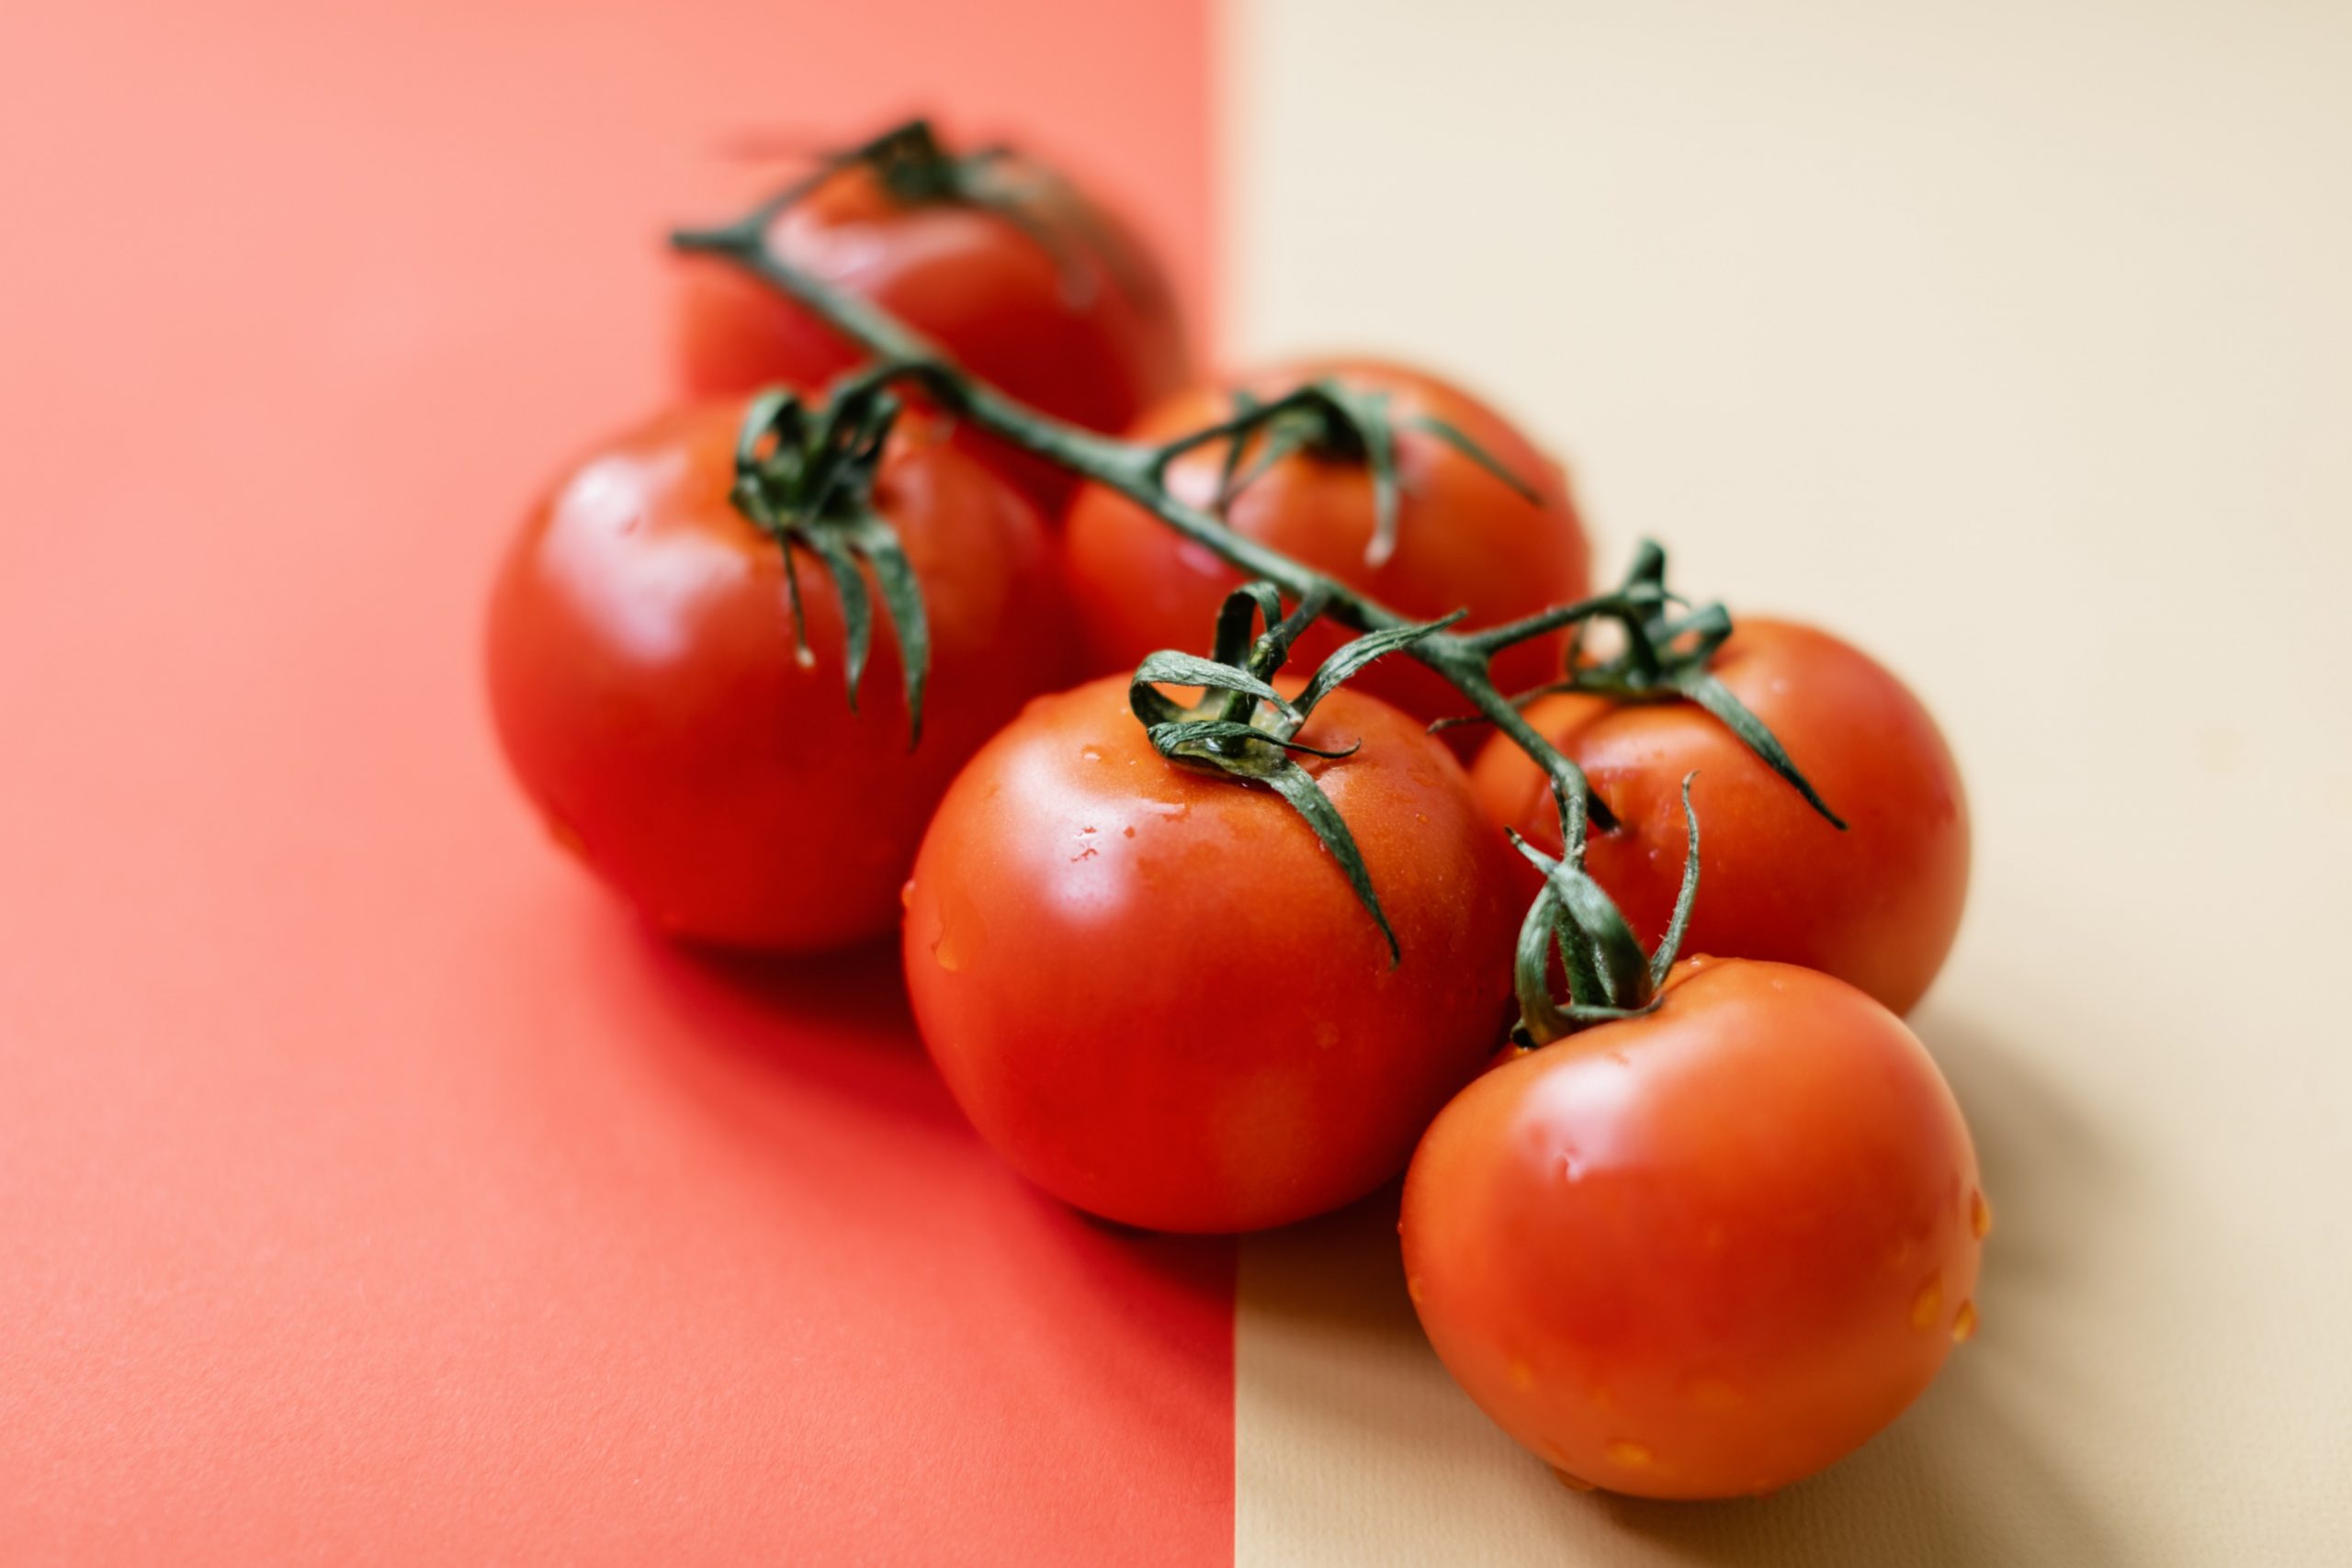 Tomato Plant Info and Care: A Blog About Caring for the Tomato Plant